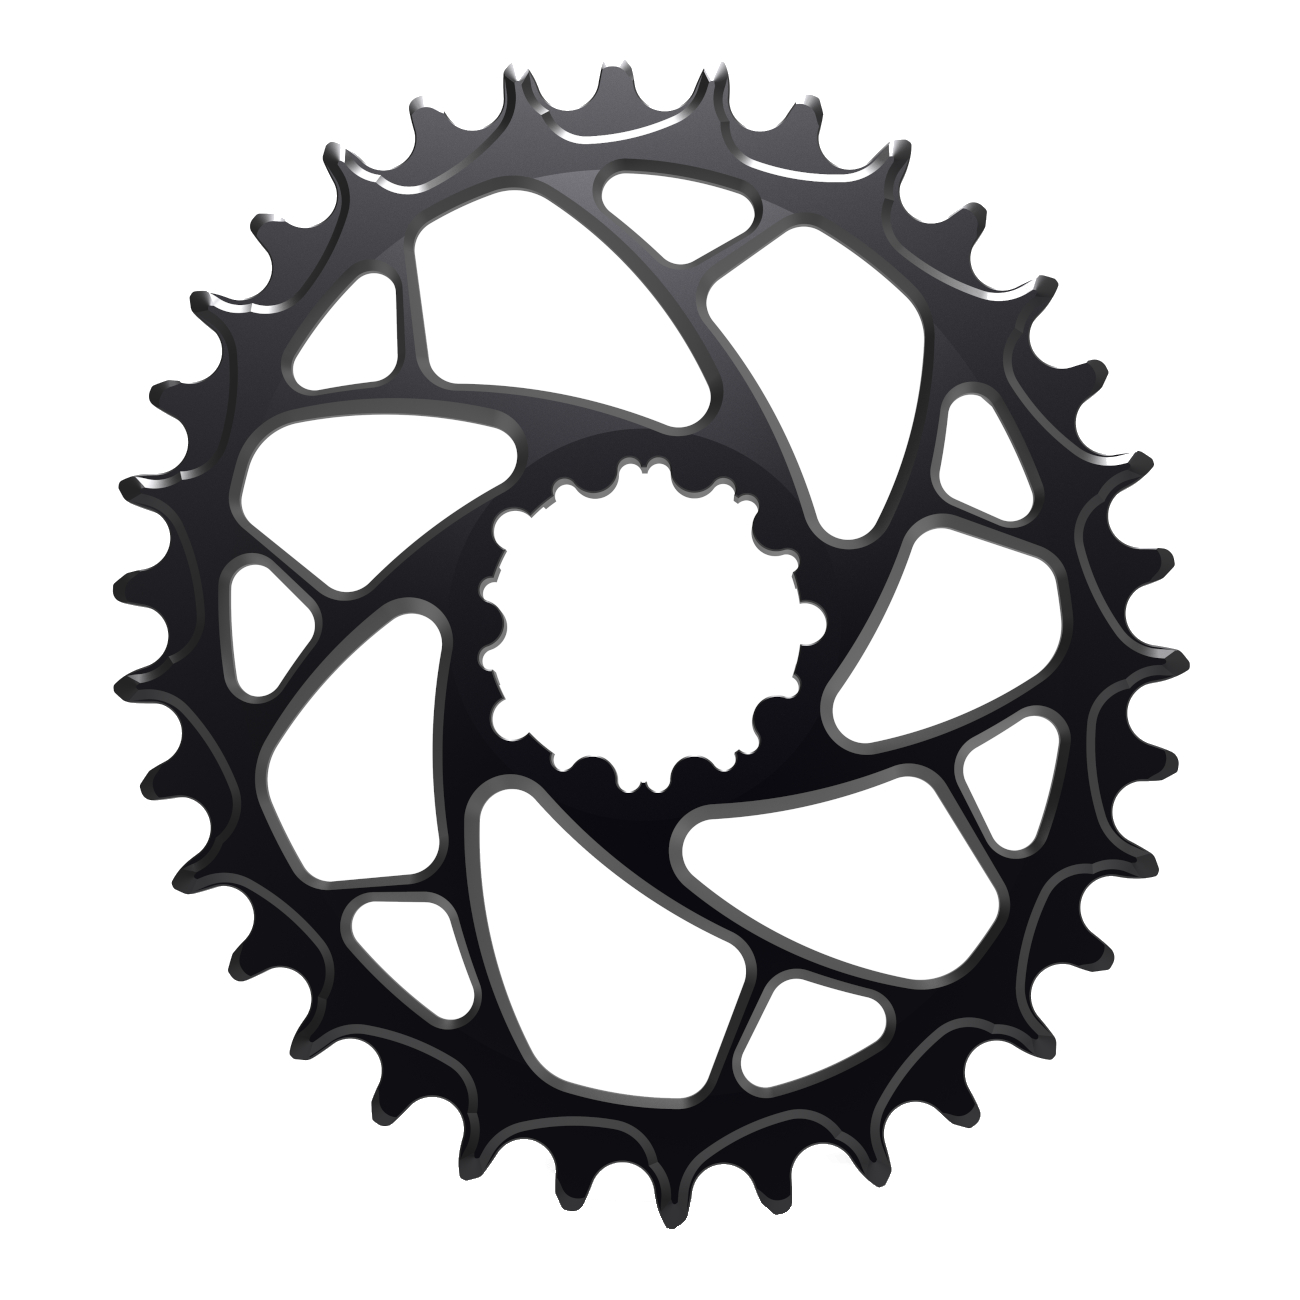 Productfoto van Alugear ELM Narrow Wide Boost Chainring - Oval - for 1x SRAM 3-Bolt Direct Mount